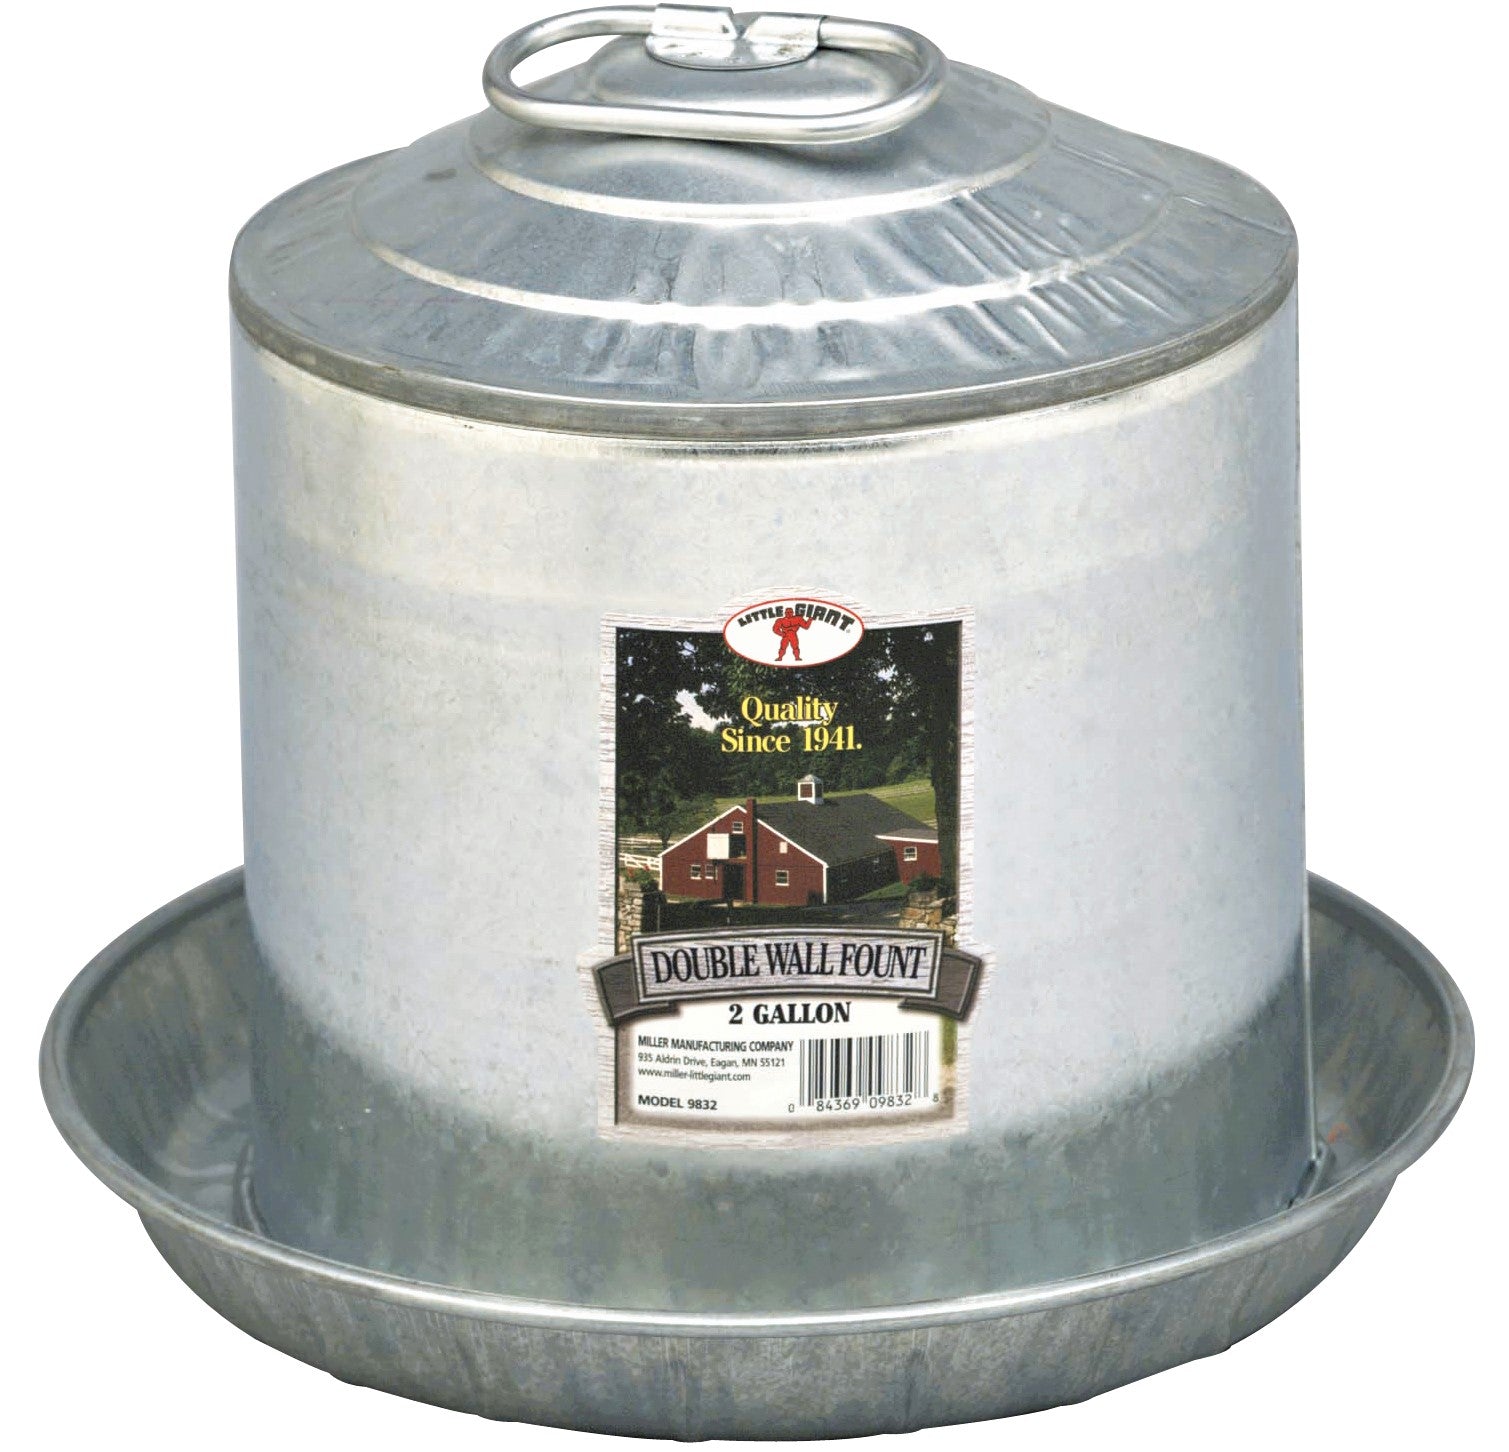 2 Gallon Double Wall Poultry Fount Galvanized Chicken Waterer